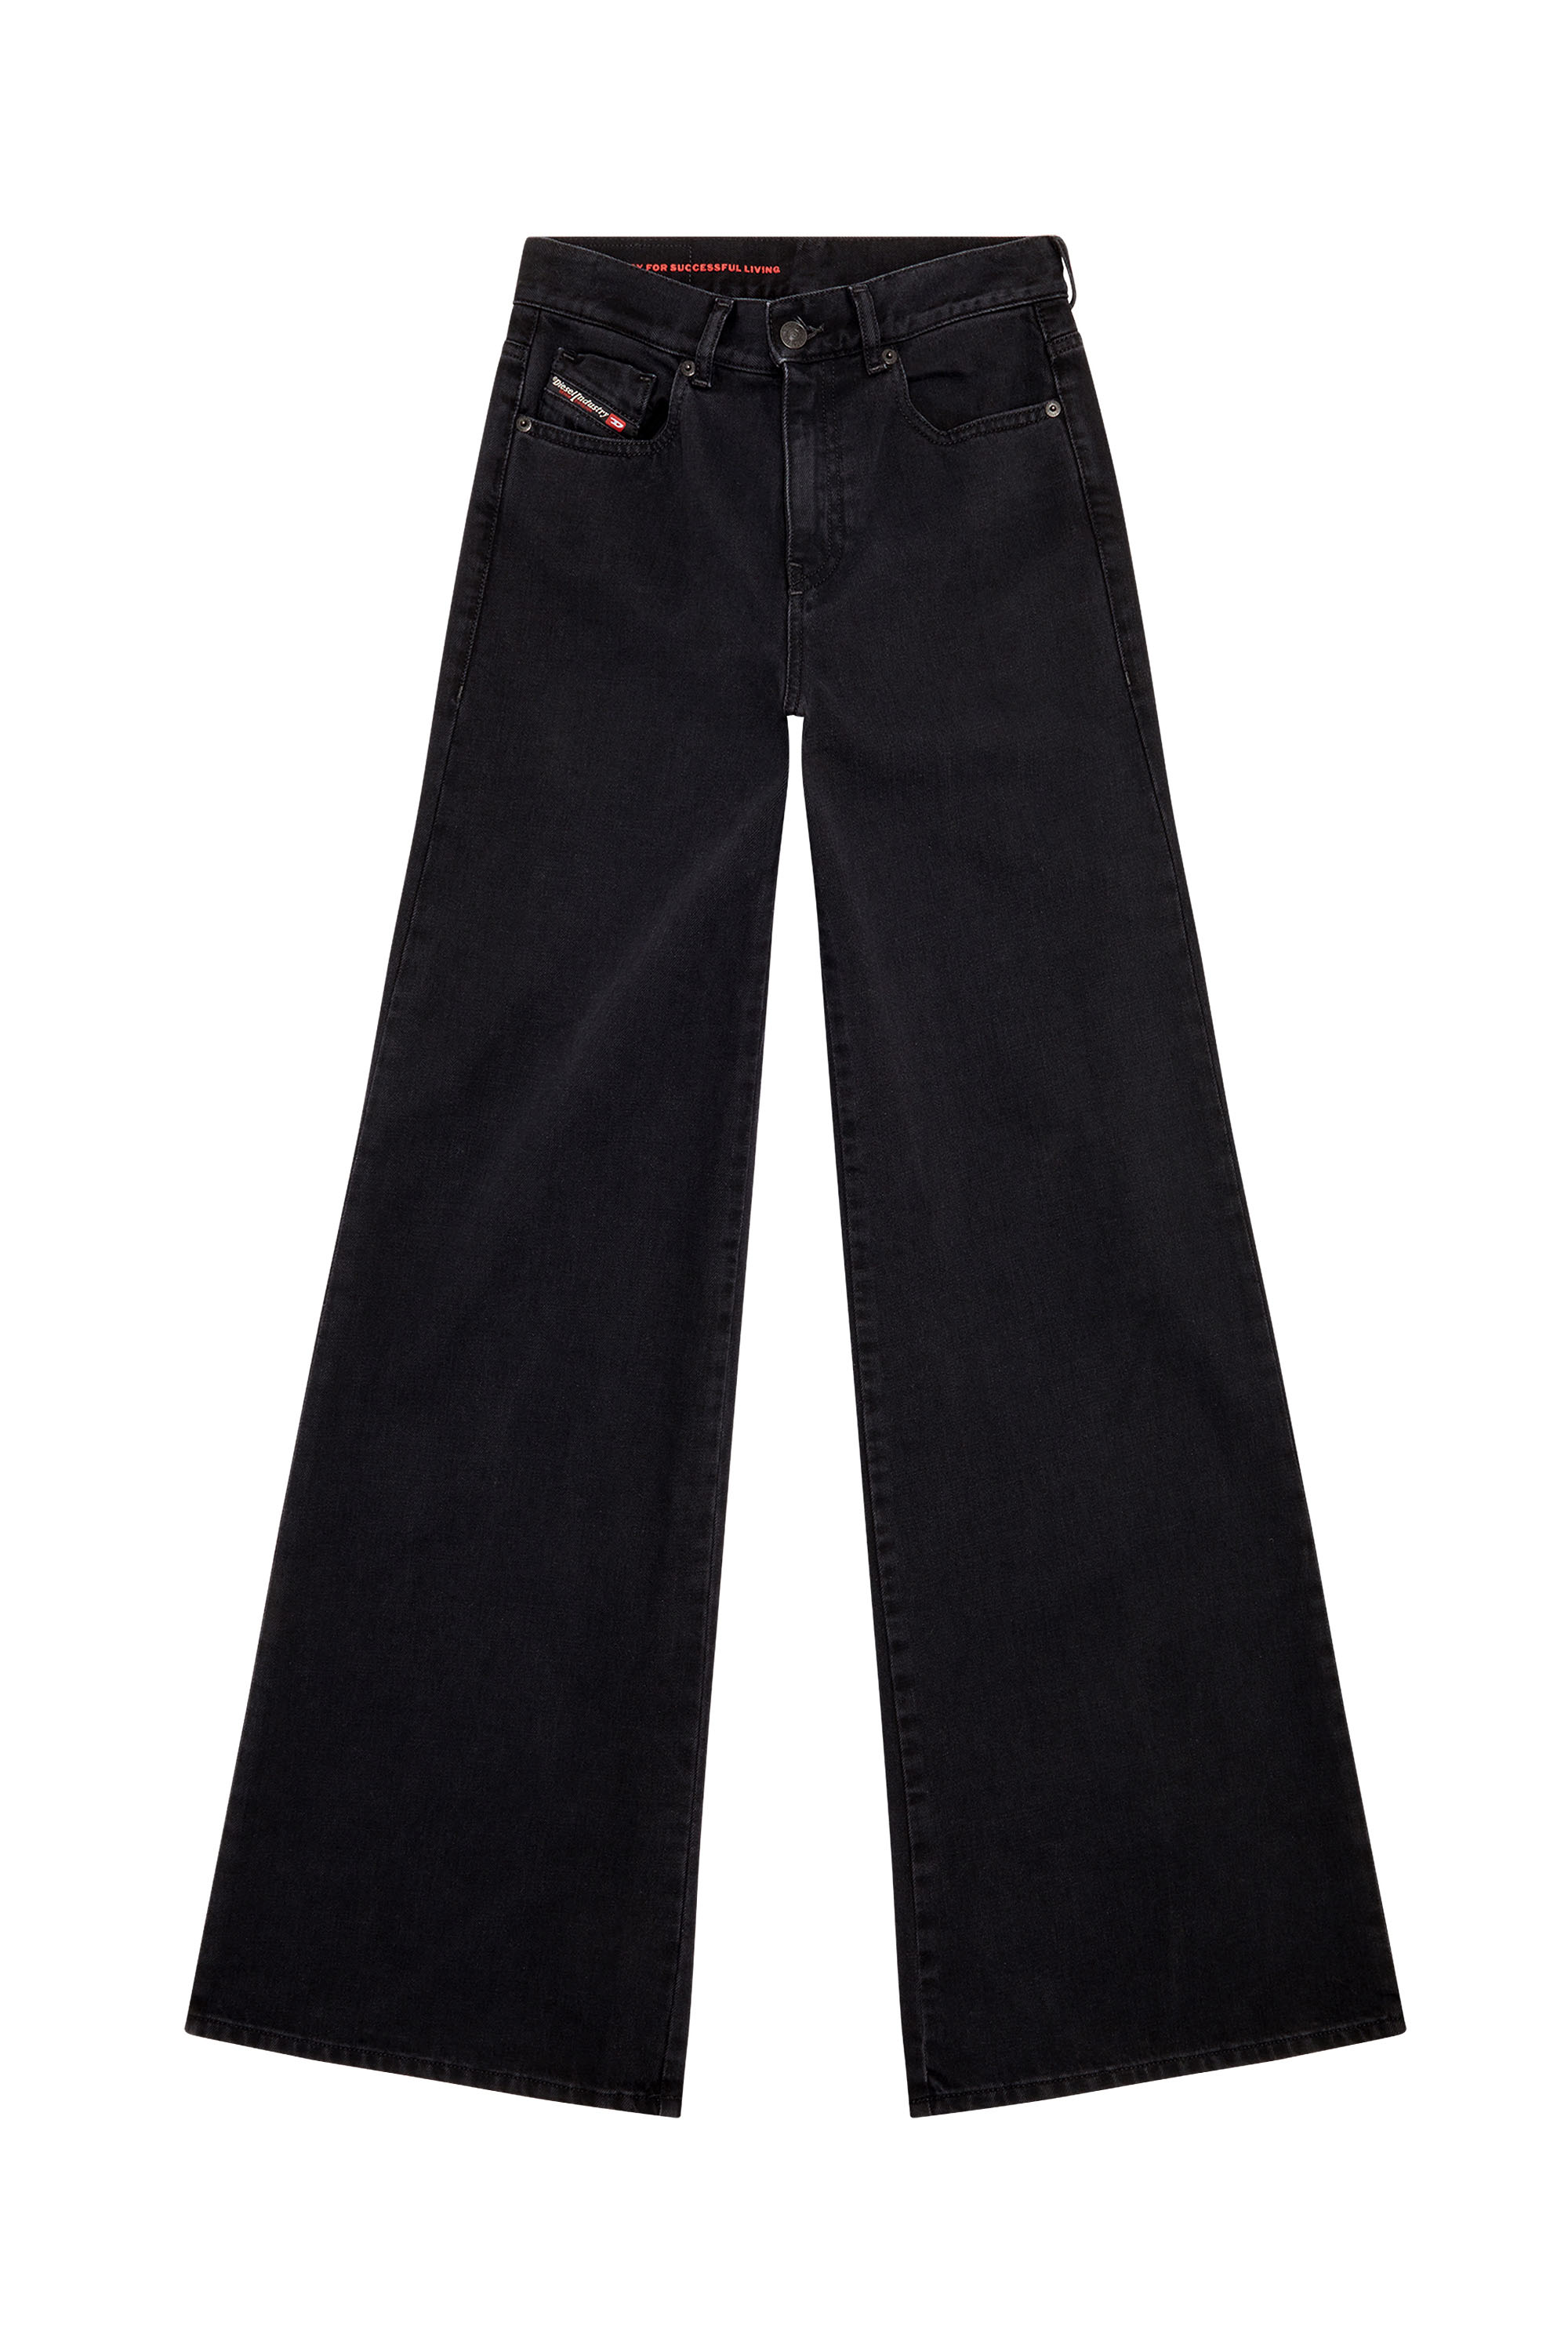 1978 Z09RL Bootcut and Flare Jeans, Negro/Gris oscuro - Vaqueros